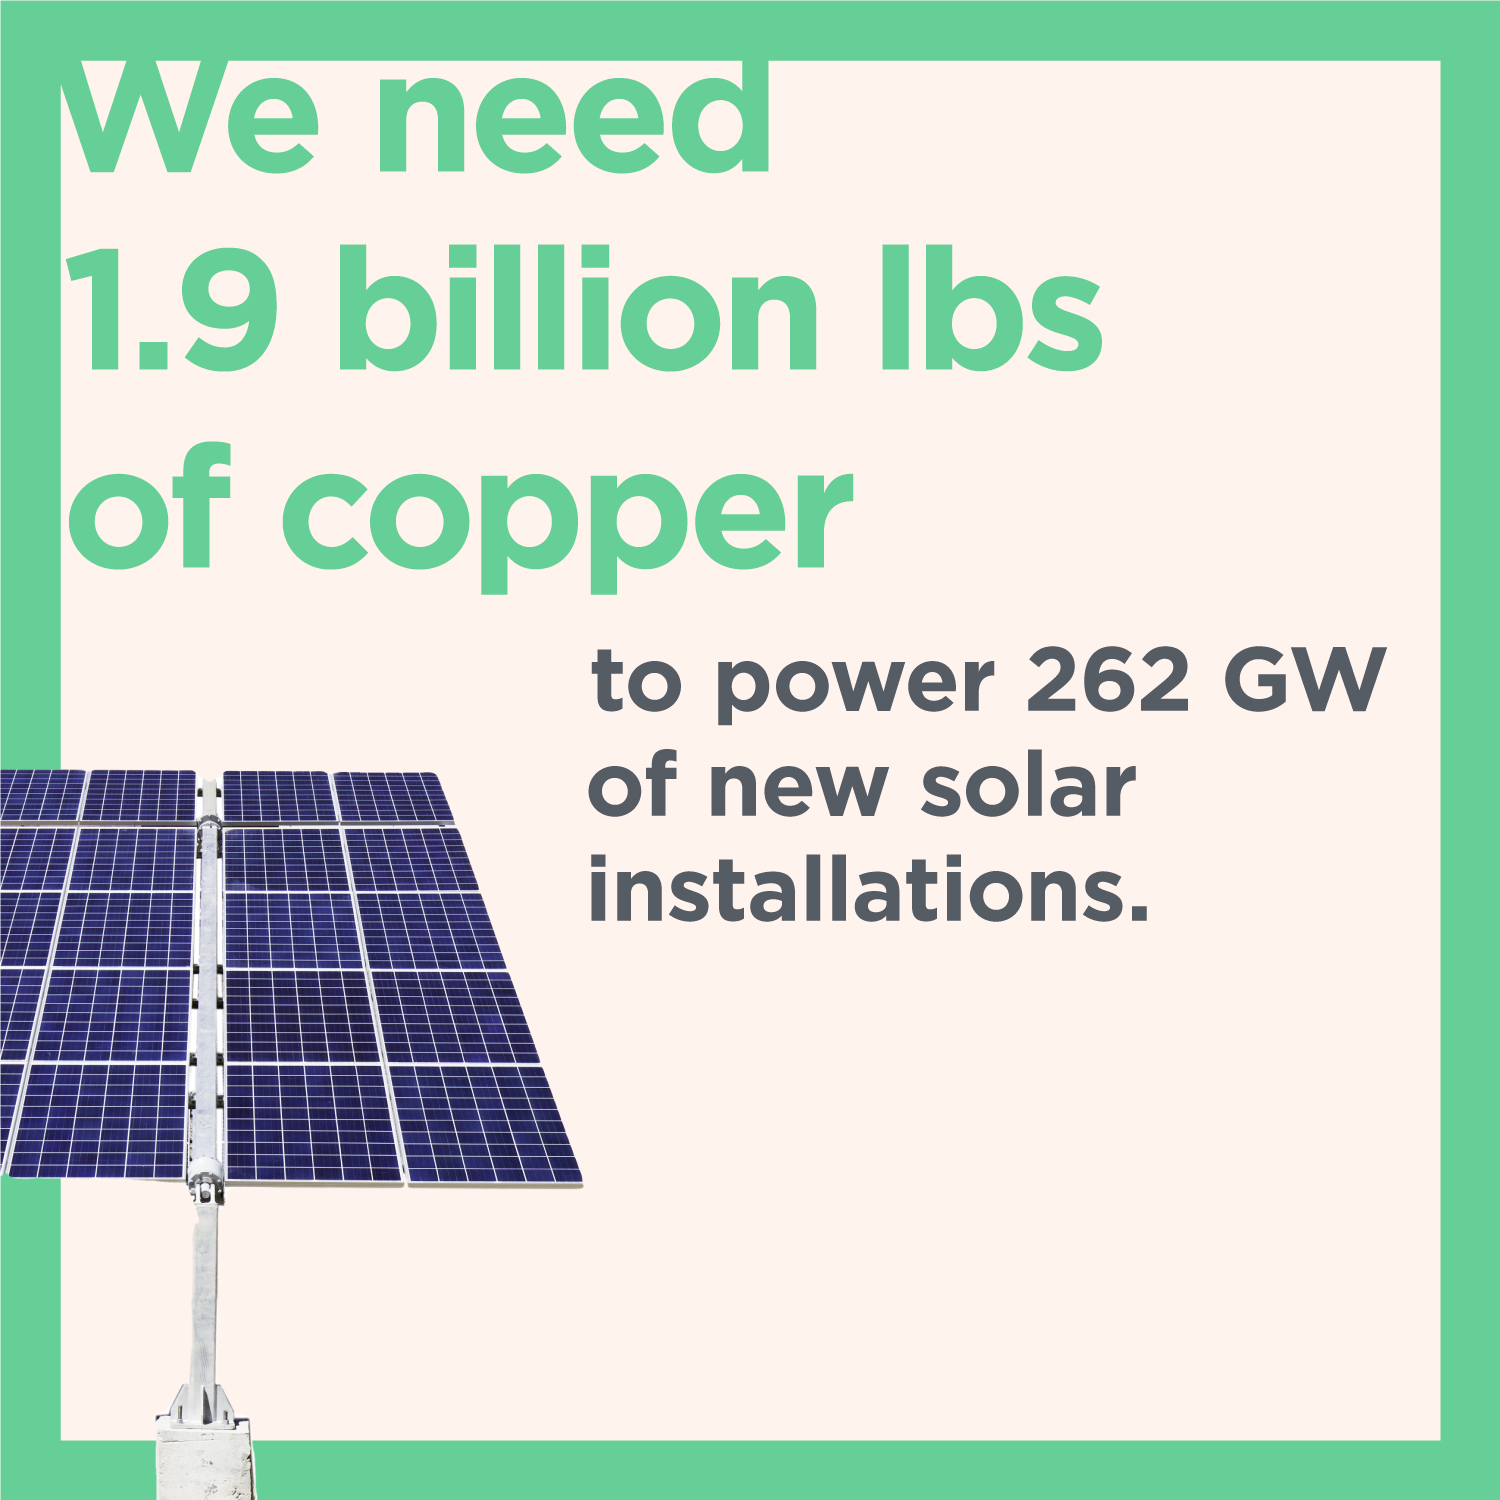 We need 1.9 billion lbs of copper to power 262 GW of new solar installations.